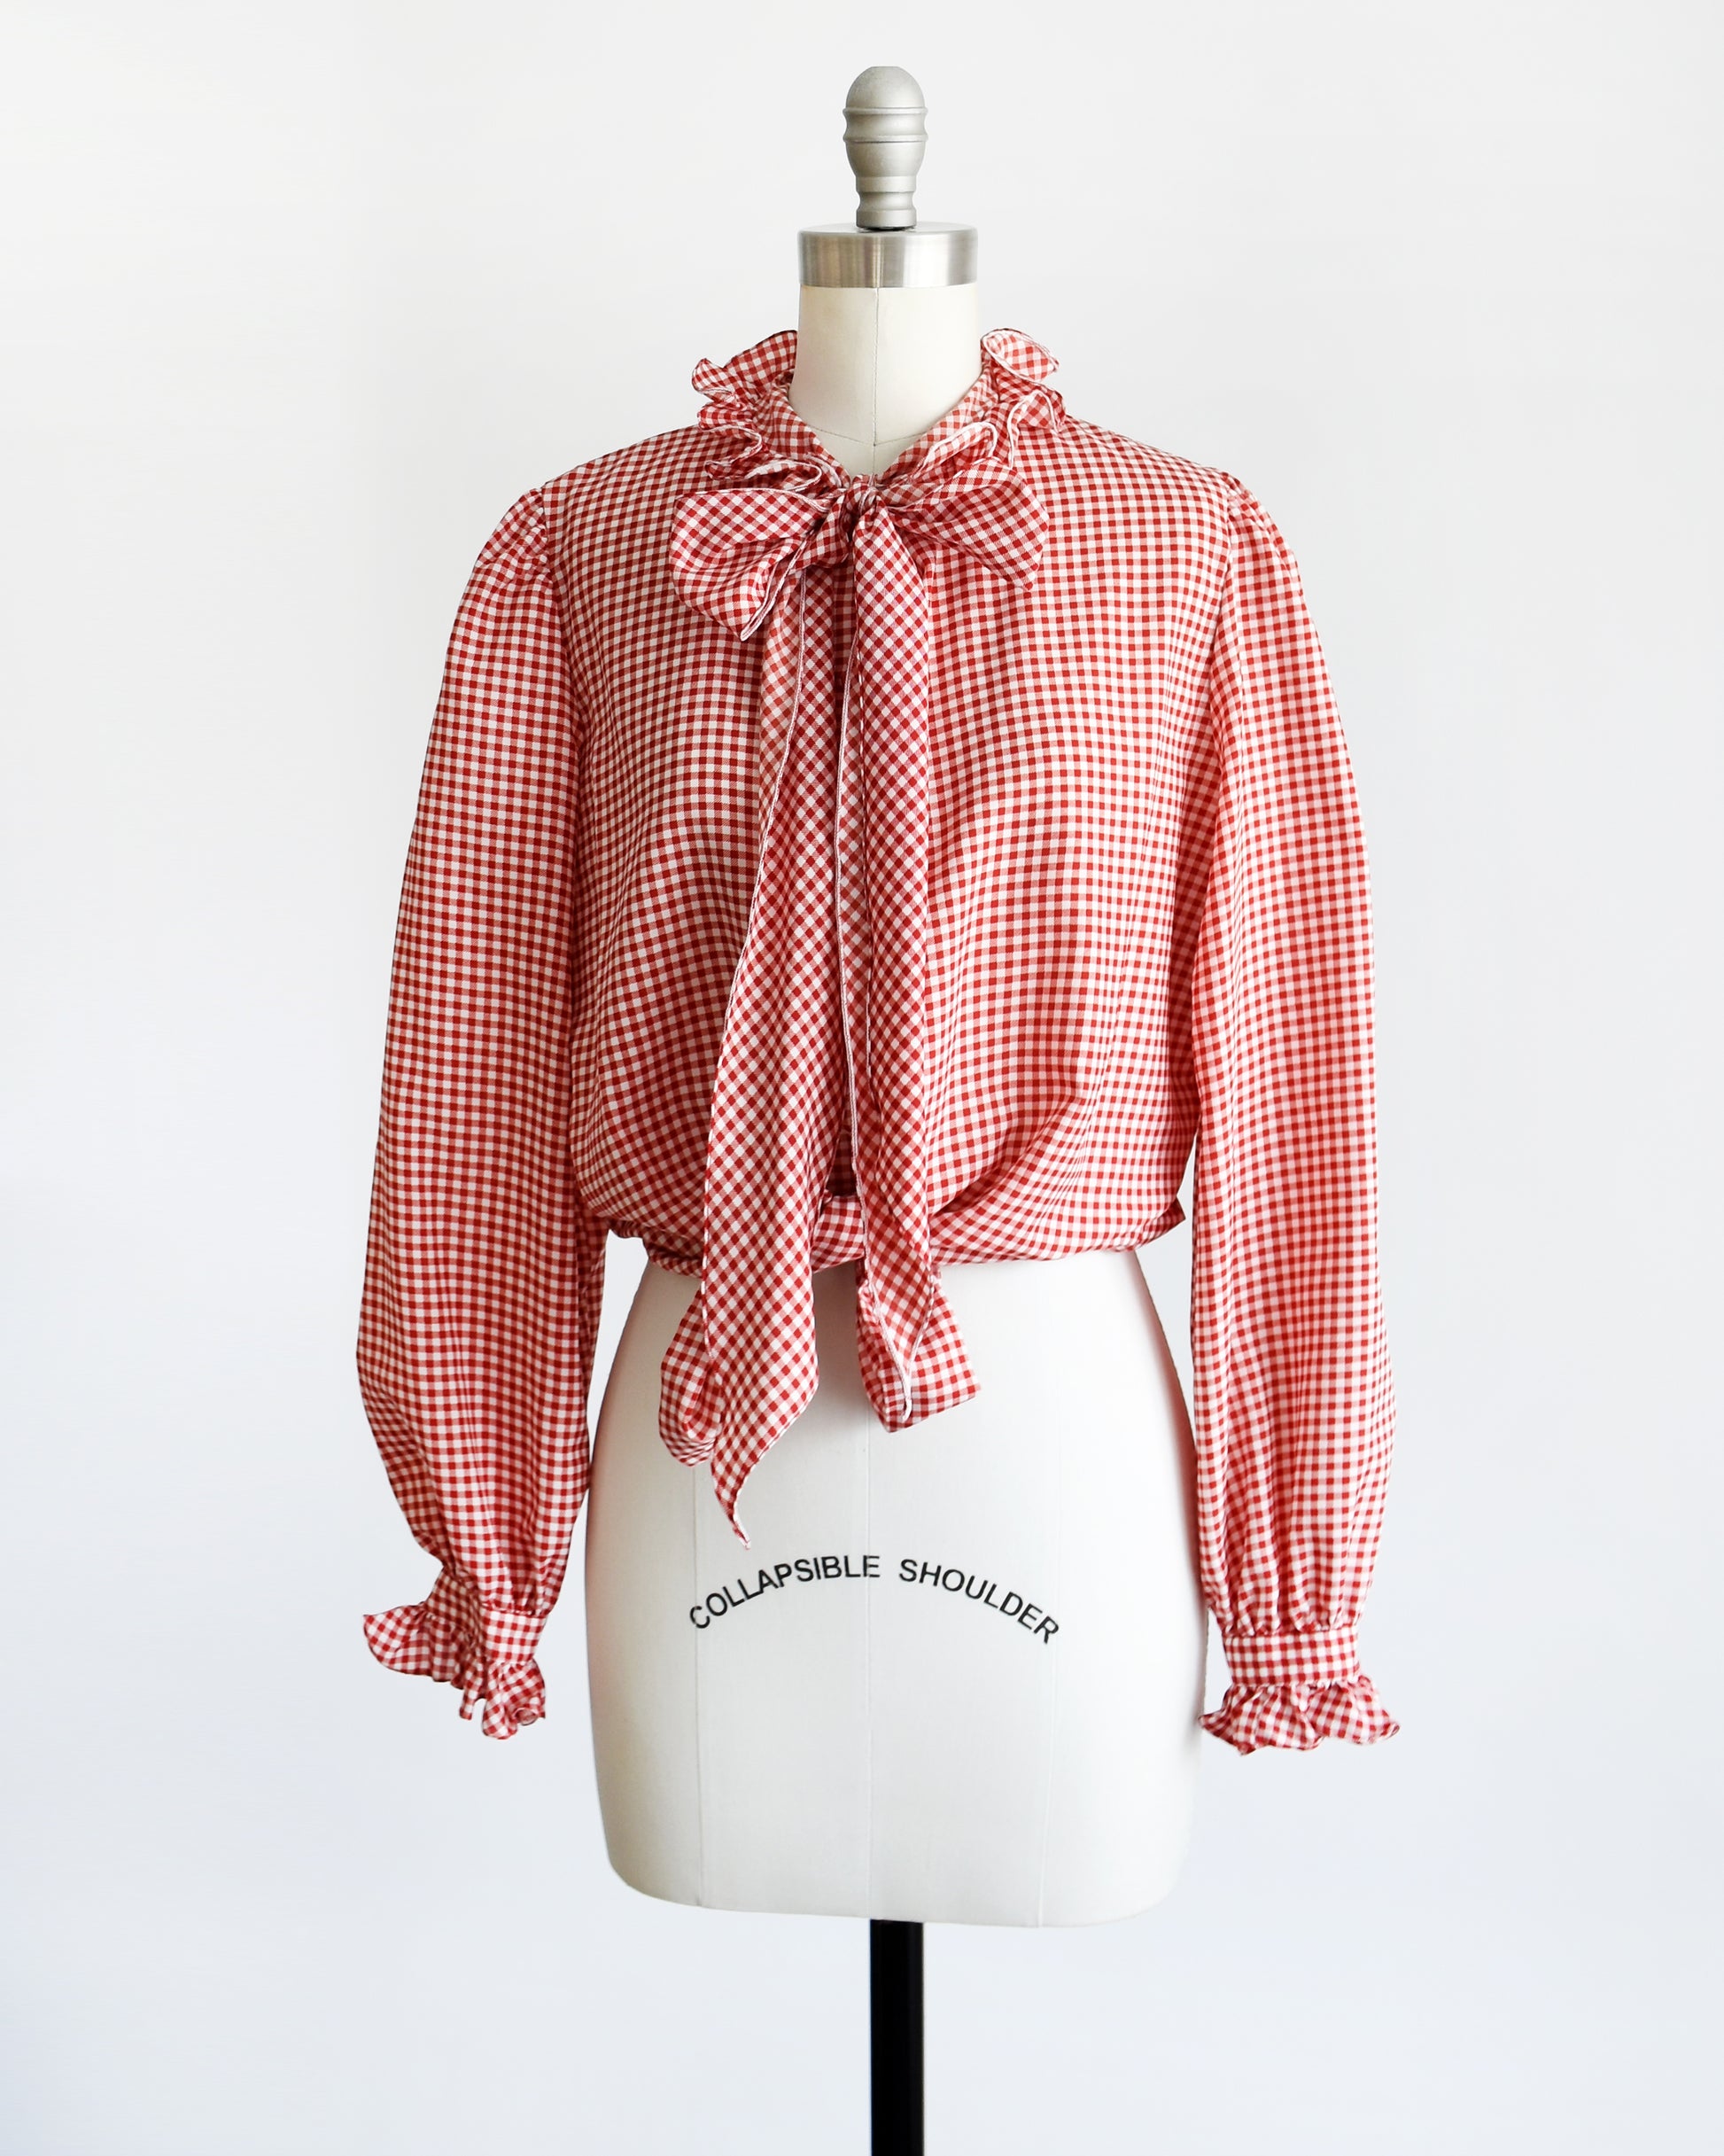 Side front view of a vintage 1980s red and white gingham blouse with ruffled collar and ascot bow. The blouse is tied at the bottom giving it a cropped look